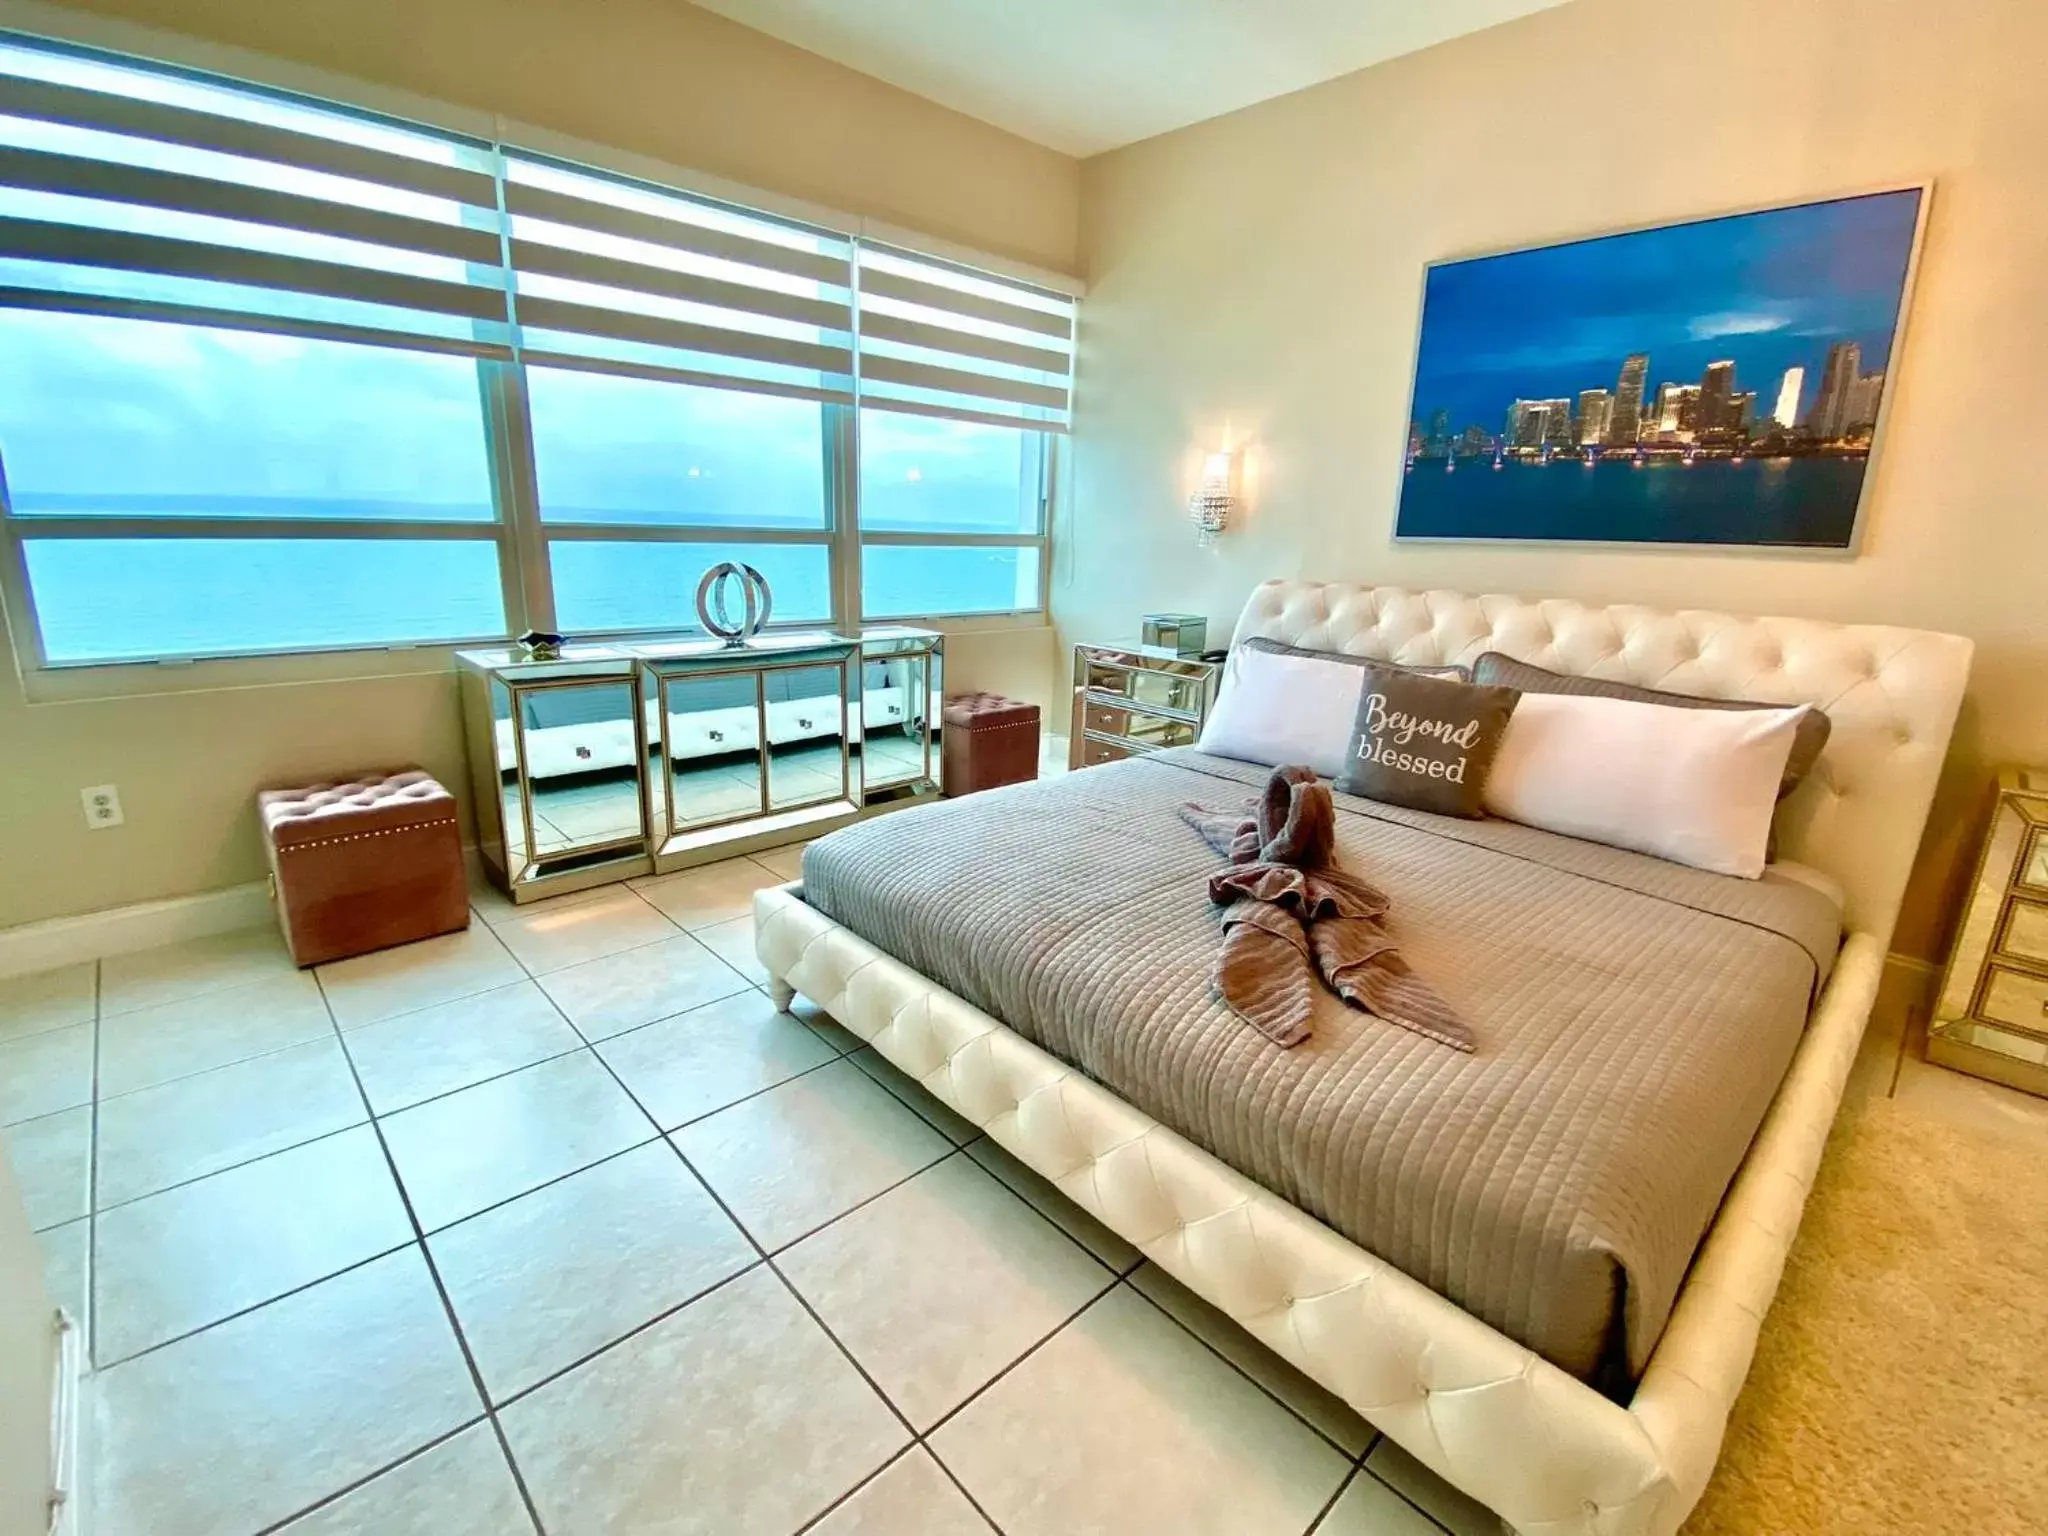 Castle Beach Resort Condo Penthouse or 1BR Direct Ocean View -just remodeled-